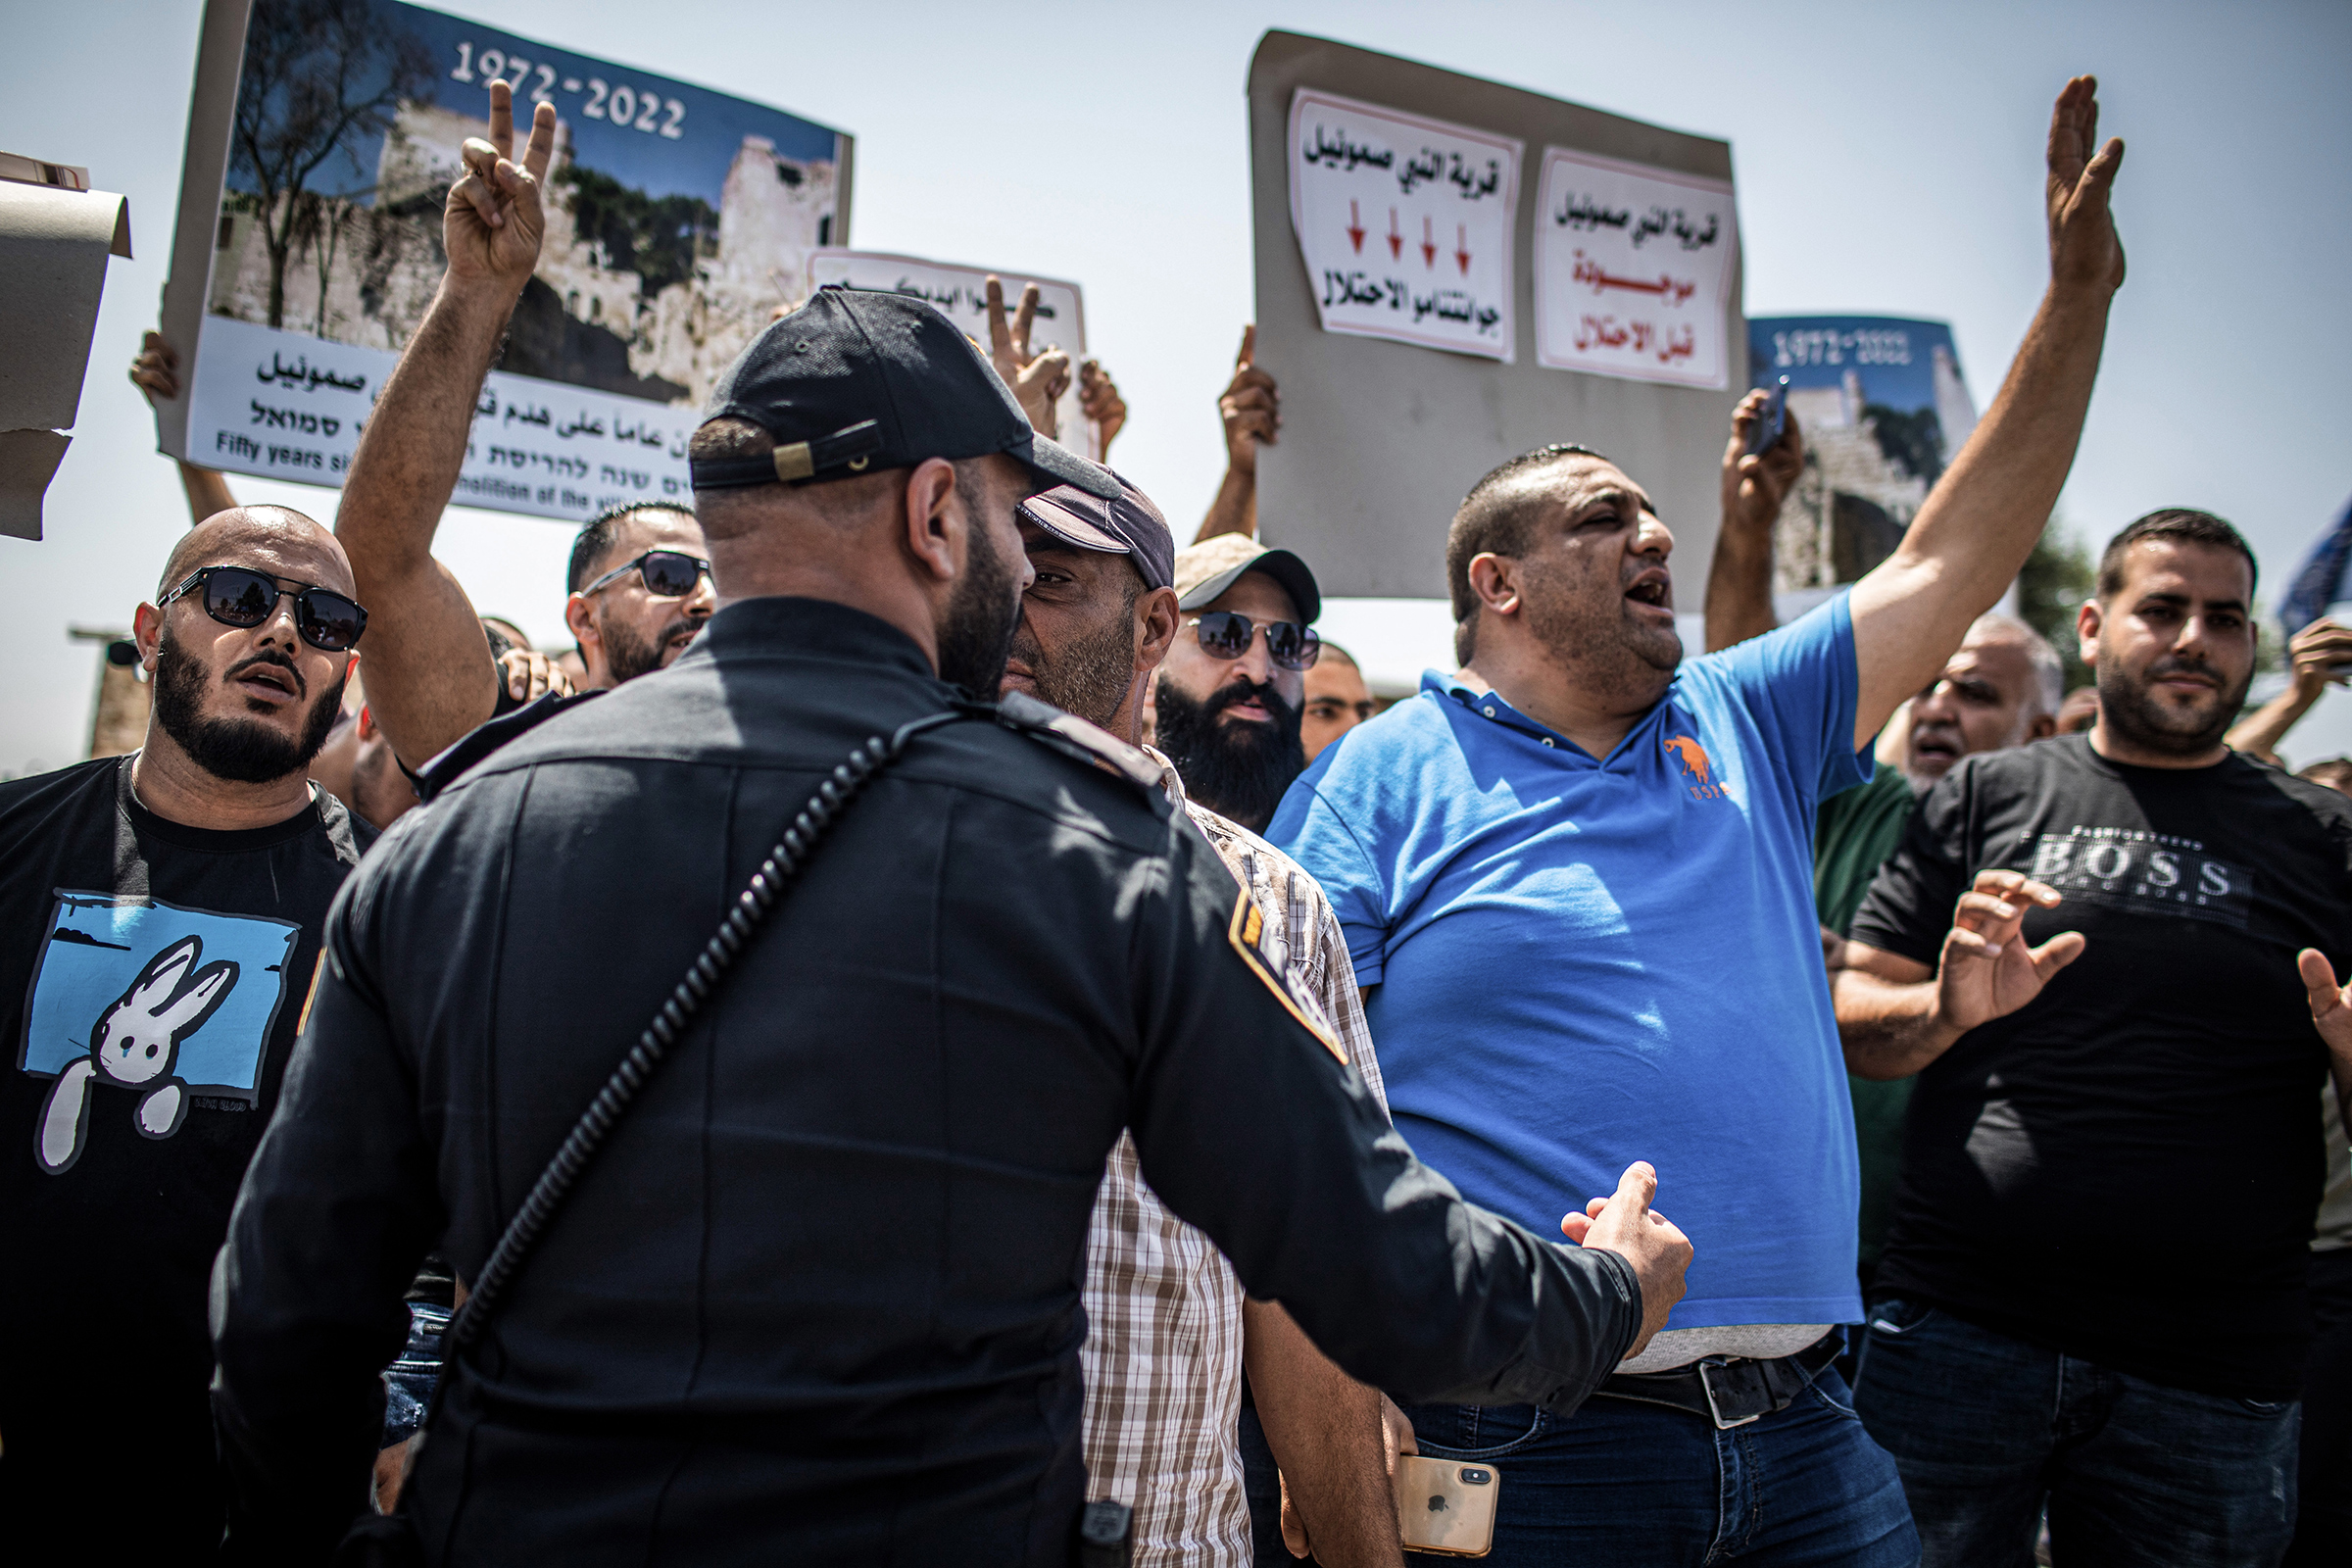 Palestinians take part in a demonstration during the visit of the Right-wing politician Itamar Ben-Gvir to Al-Nabi Samuel village, north of Jerusalem, on Sept. 2. (Ilia Yefimovich—picture alliance/Getty Images)